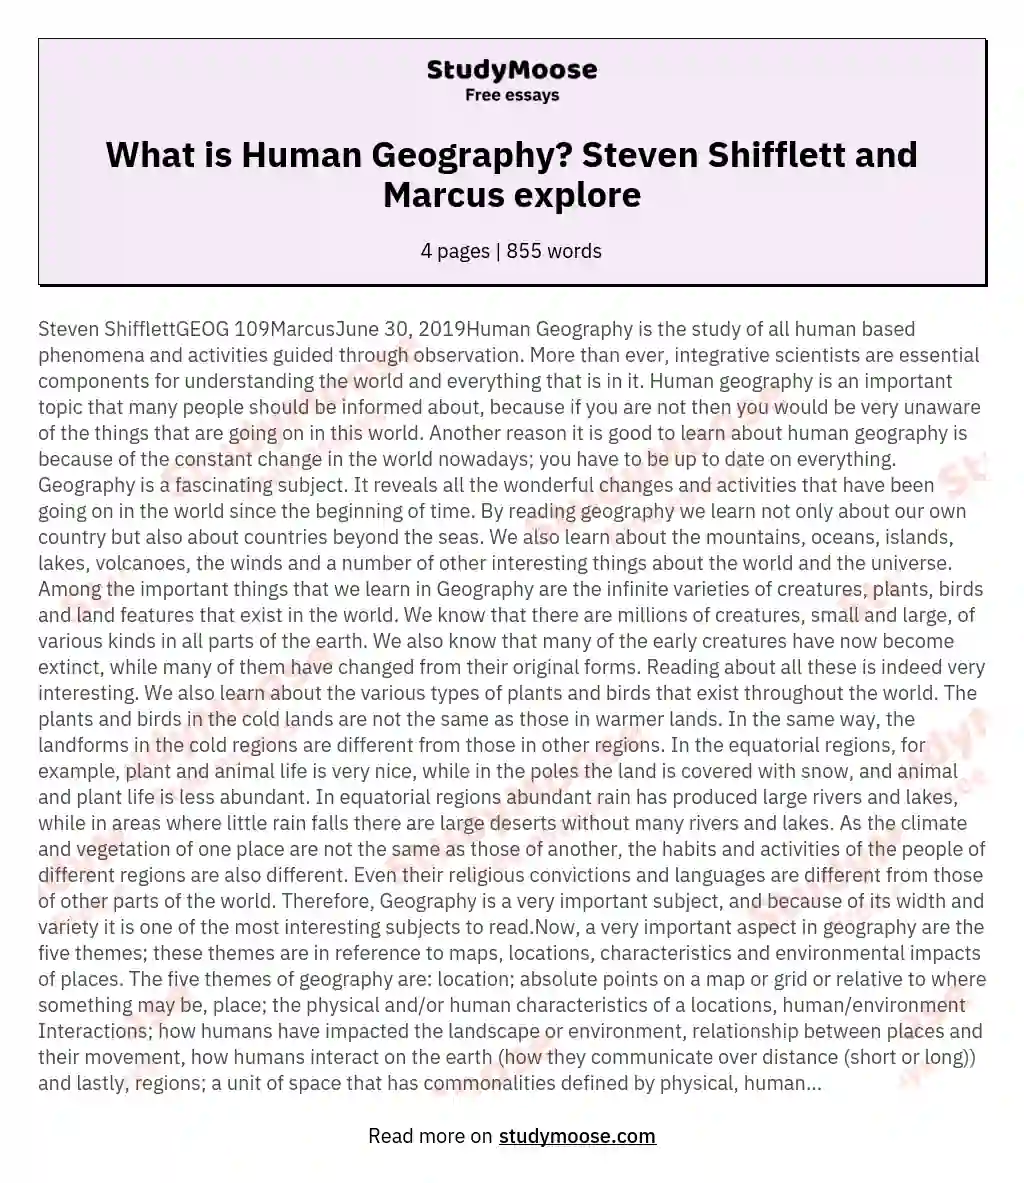 What is Human Geography? Steven Shifflett and Marcus explore essay